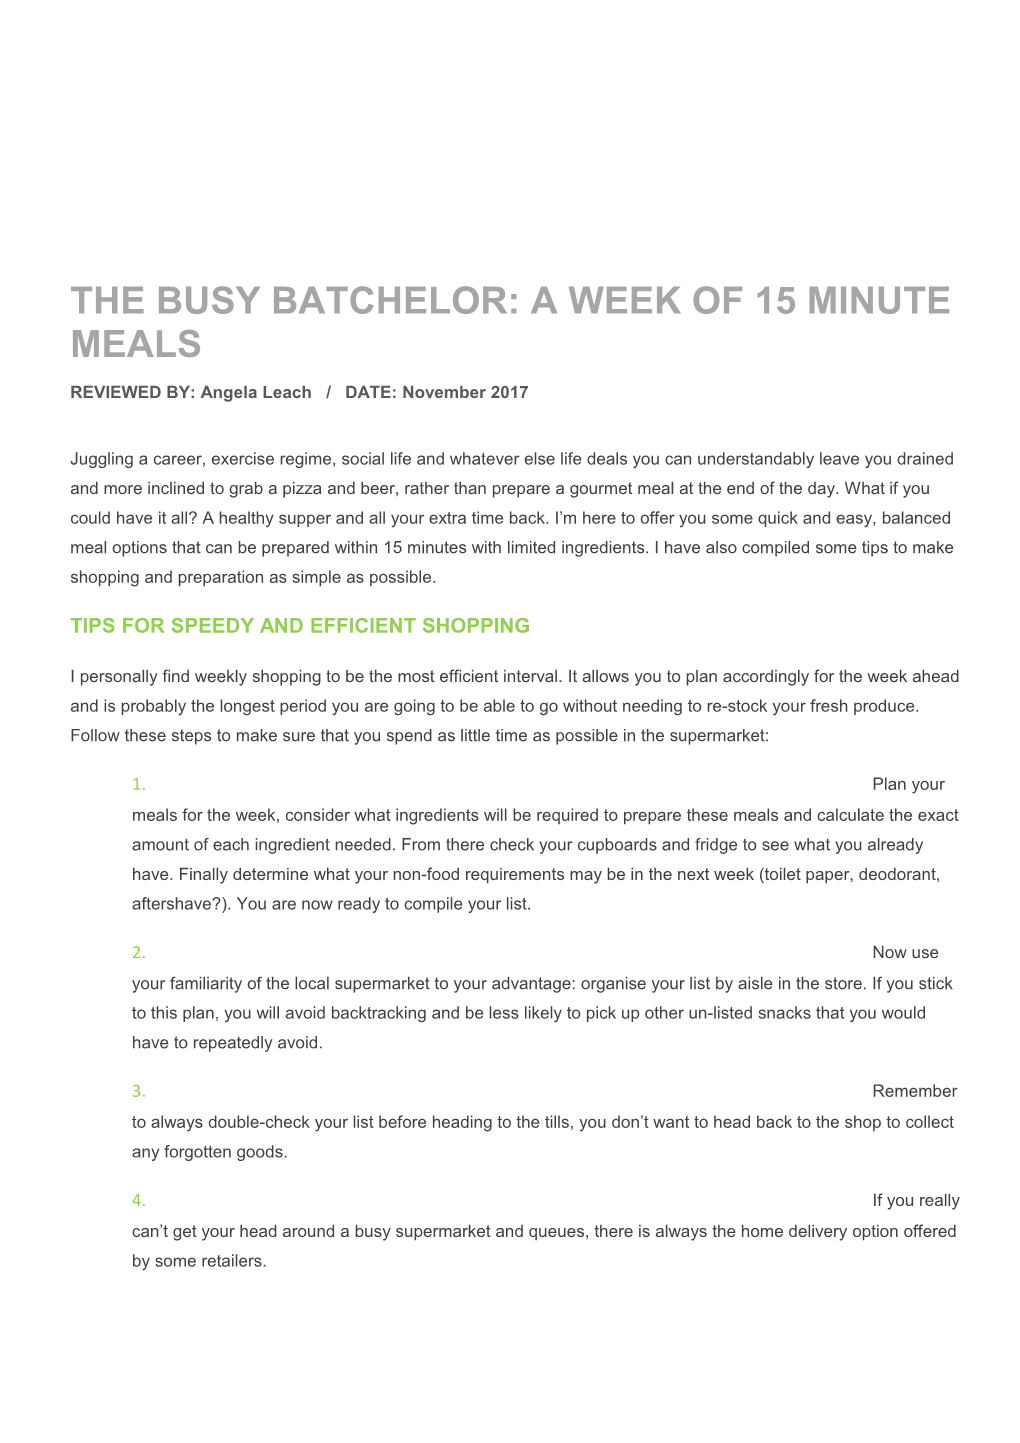 The Busy Batchelor: a Week of 15 Minute Meals